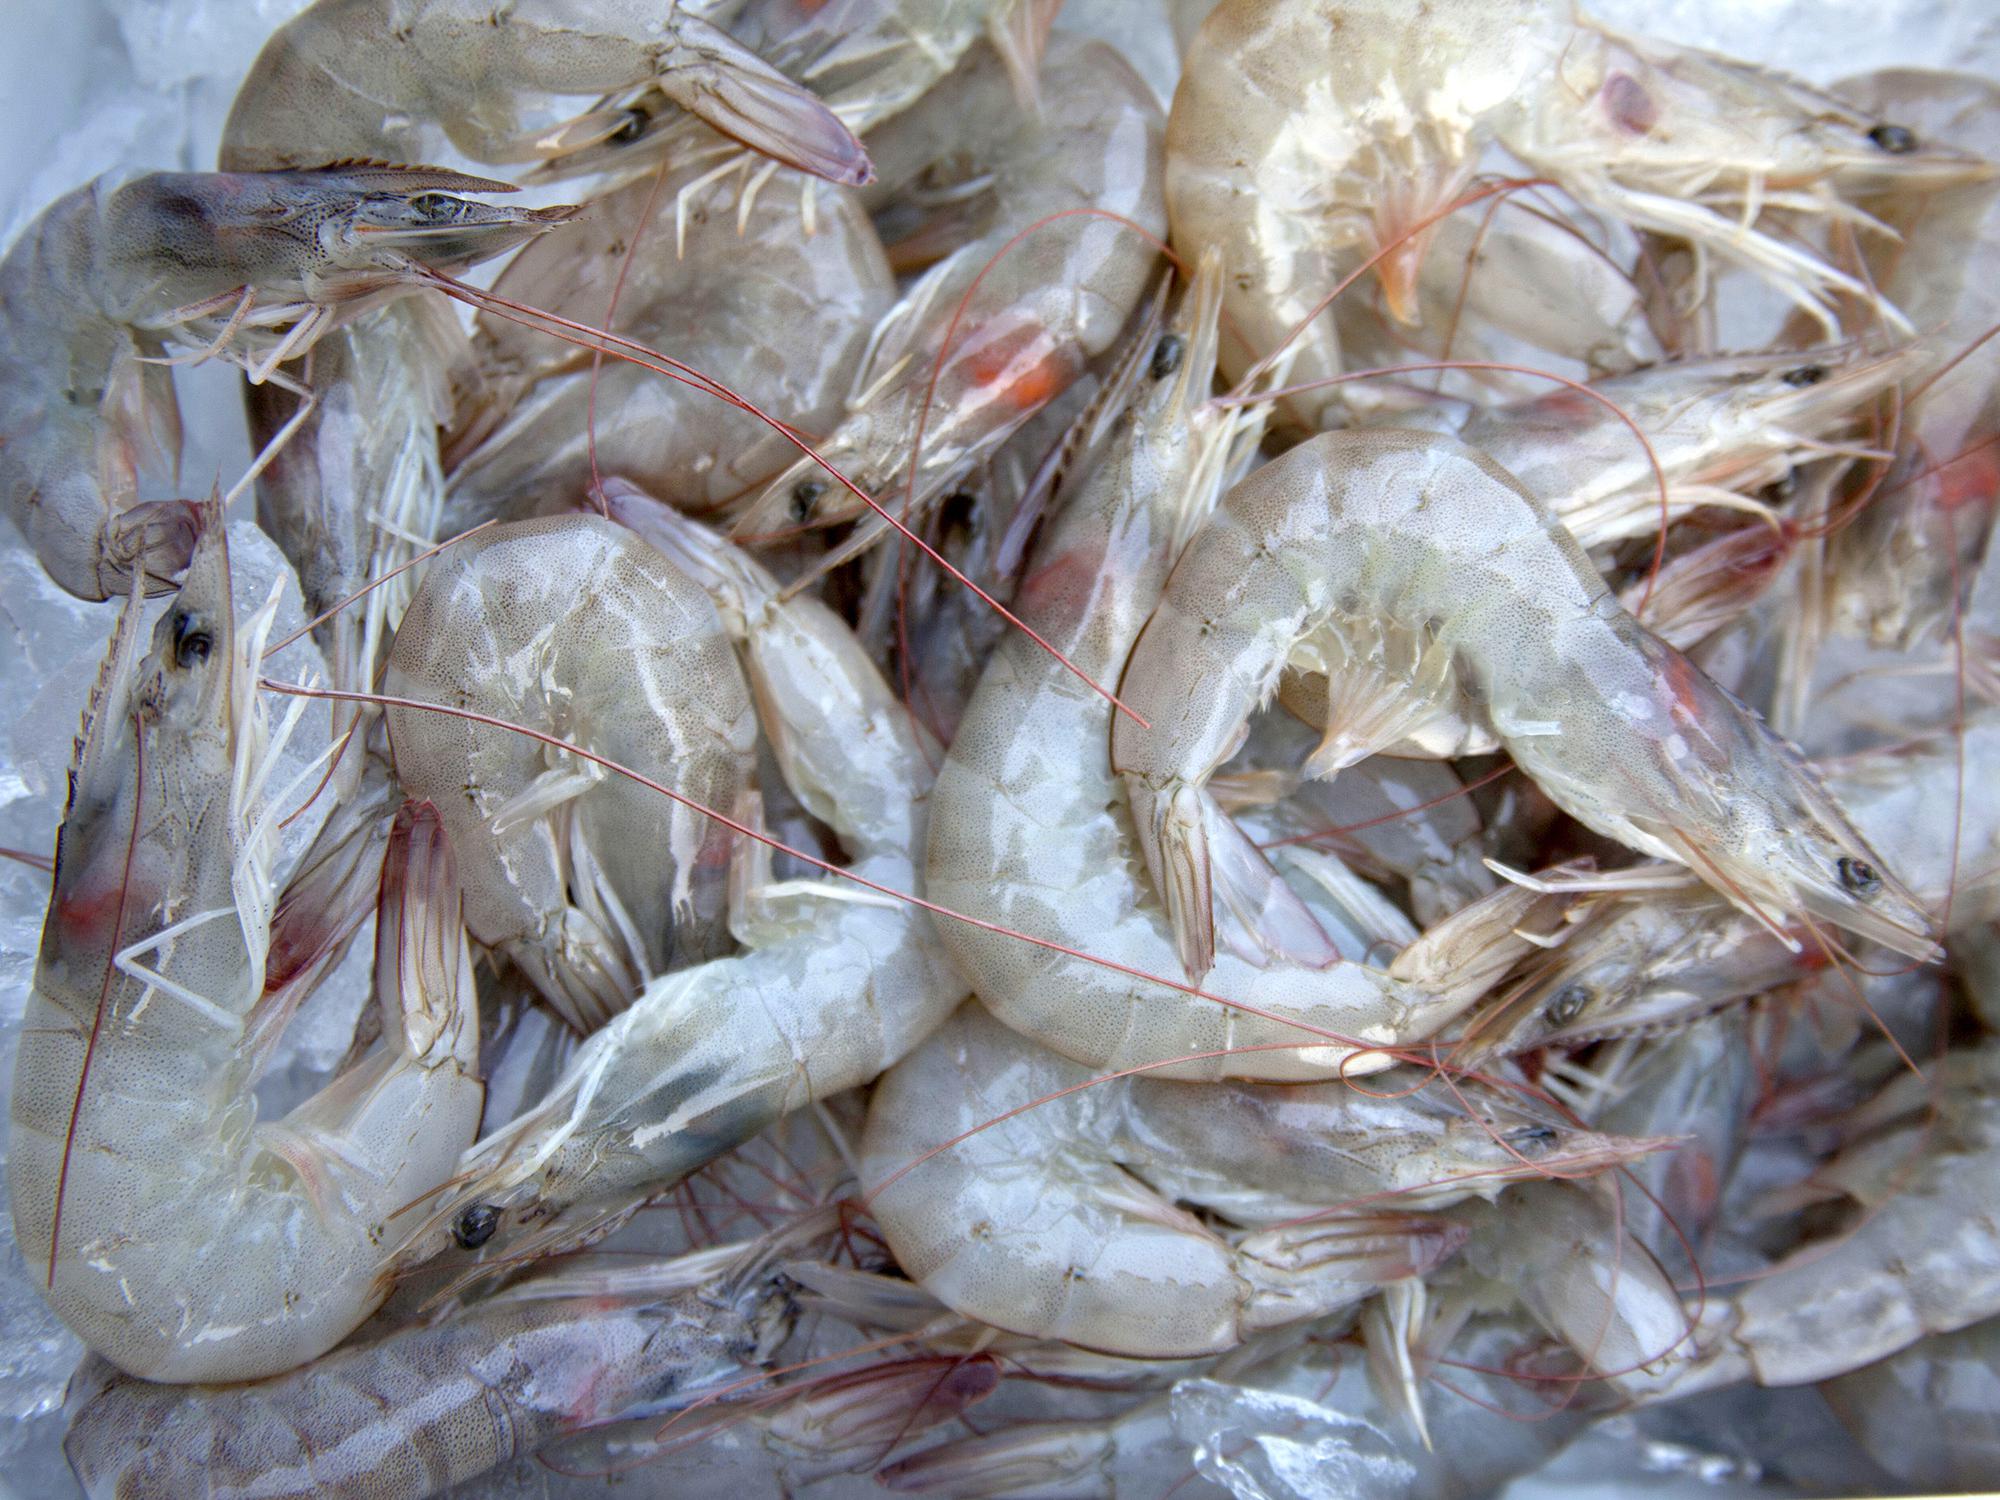 Cool temperatures delayed the start of shrimp season in Mississippi's coastal waters until June 11, but if conditions hold, the crop is predicted to be about the same as last year's in terms of prices and production costs. (Photo by MSU Ag Communications/Kat Lawrence)